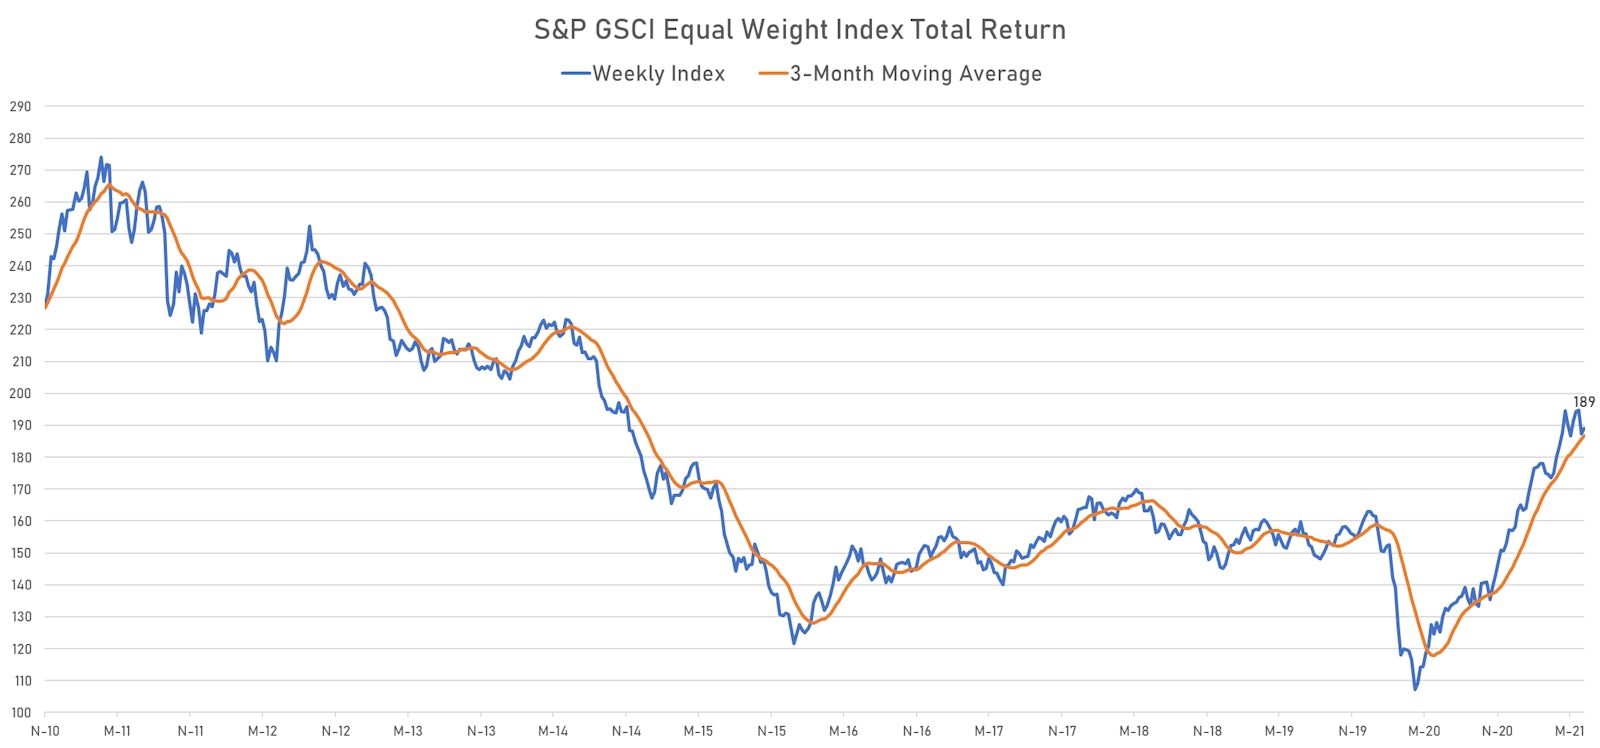 S&P GSCI Equal Weight Currently Sitting On Its 3-Month Moving Average | Sources: ϕpost, Refinitiv data